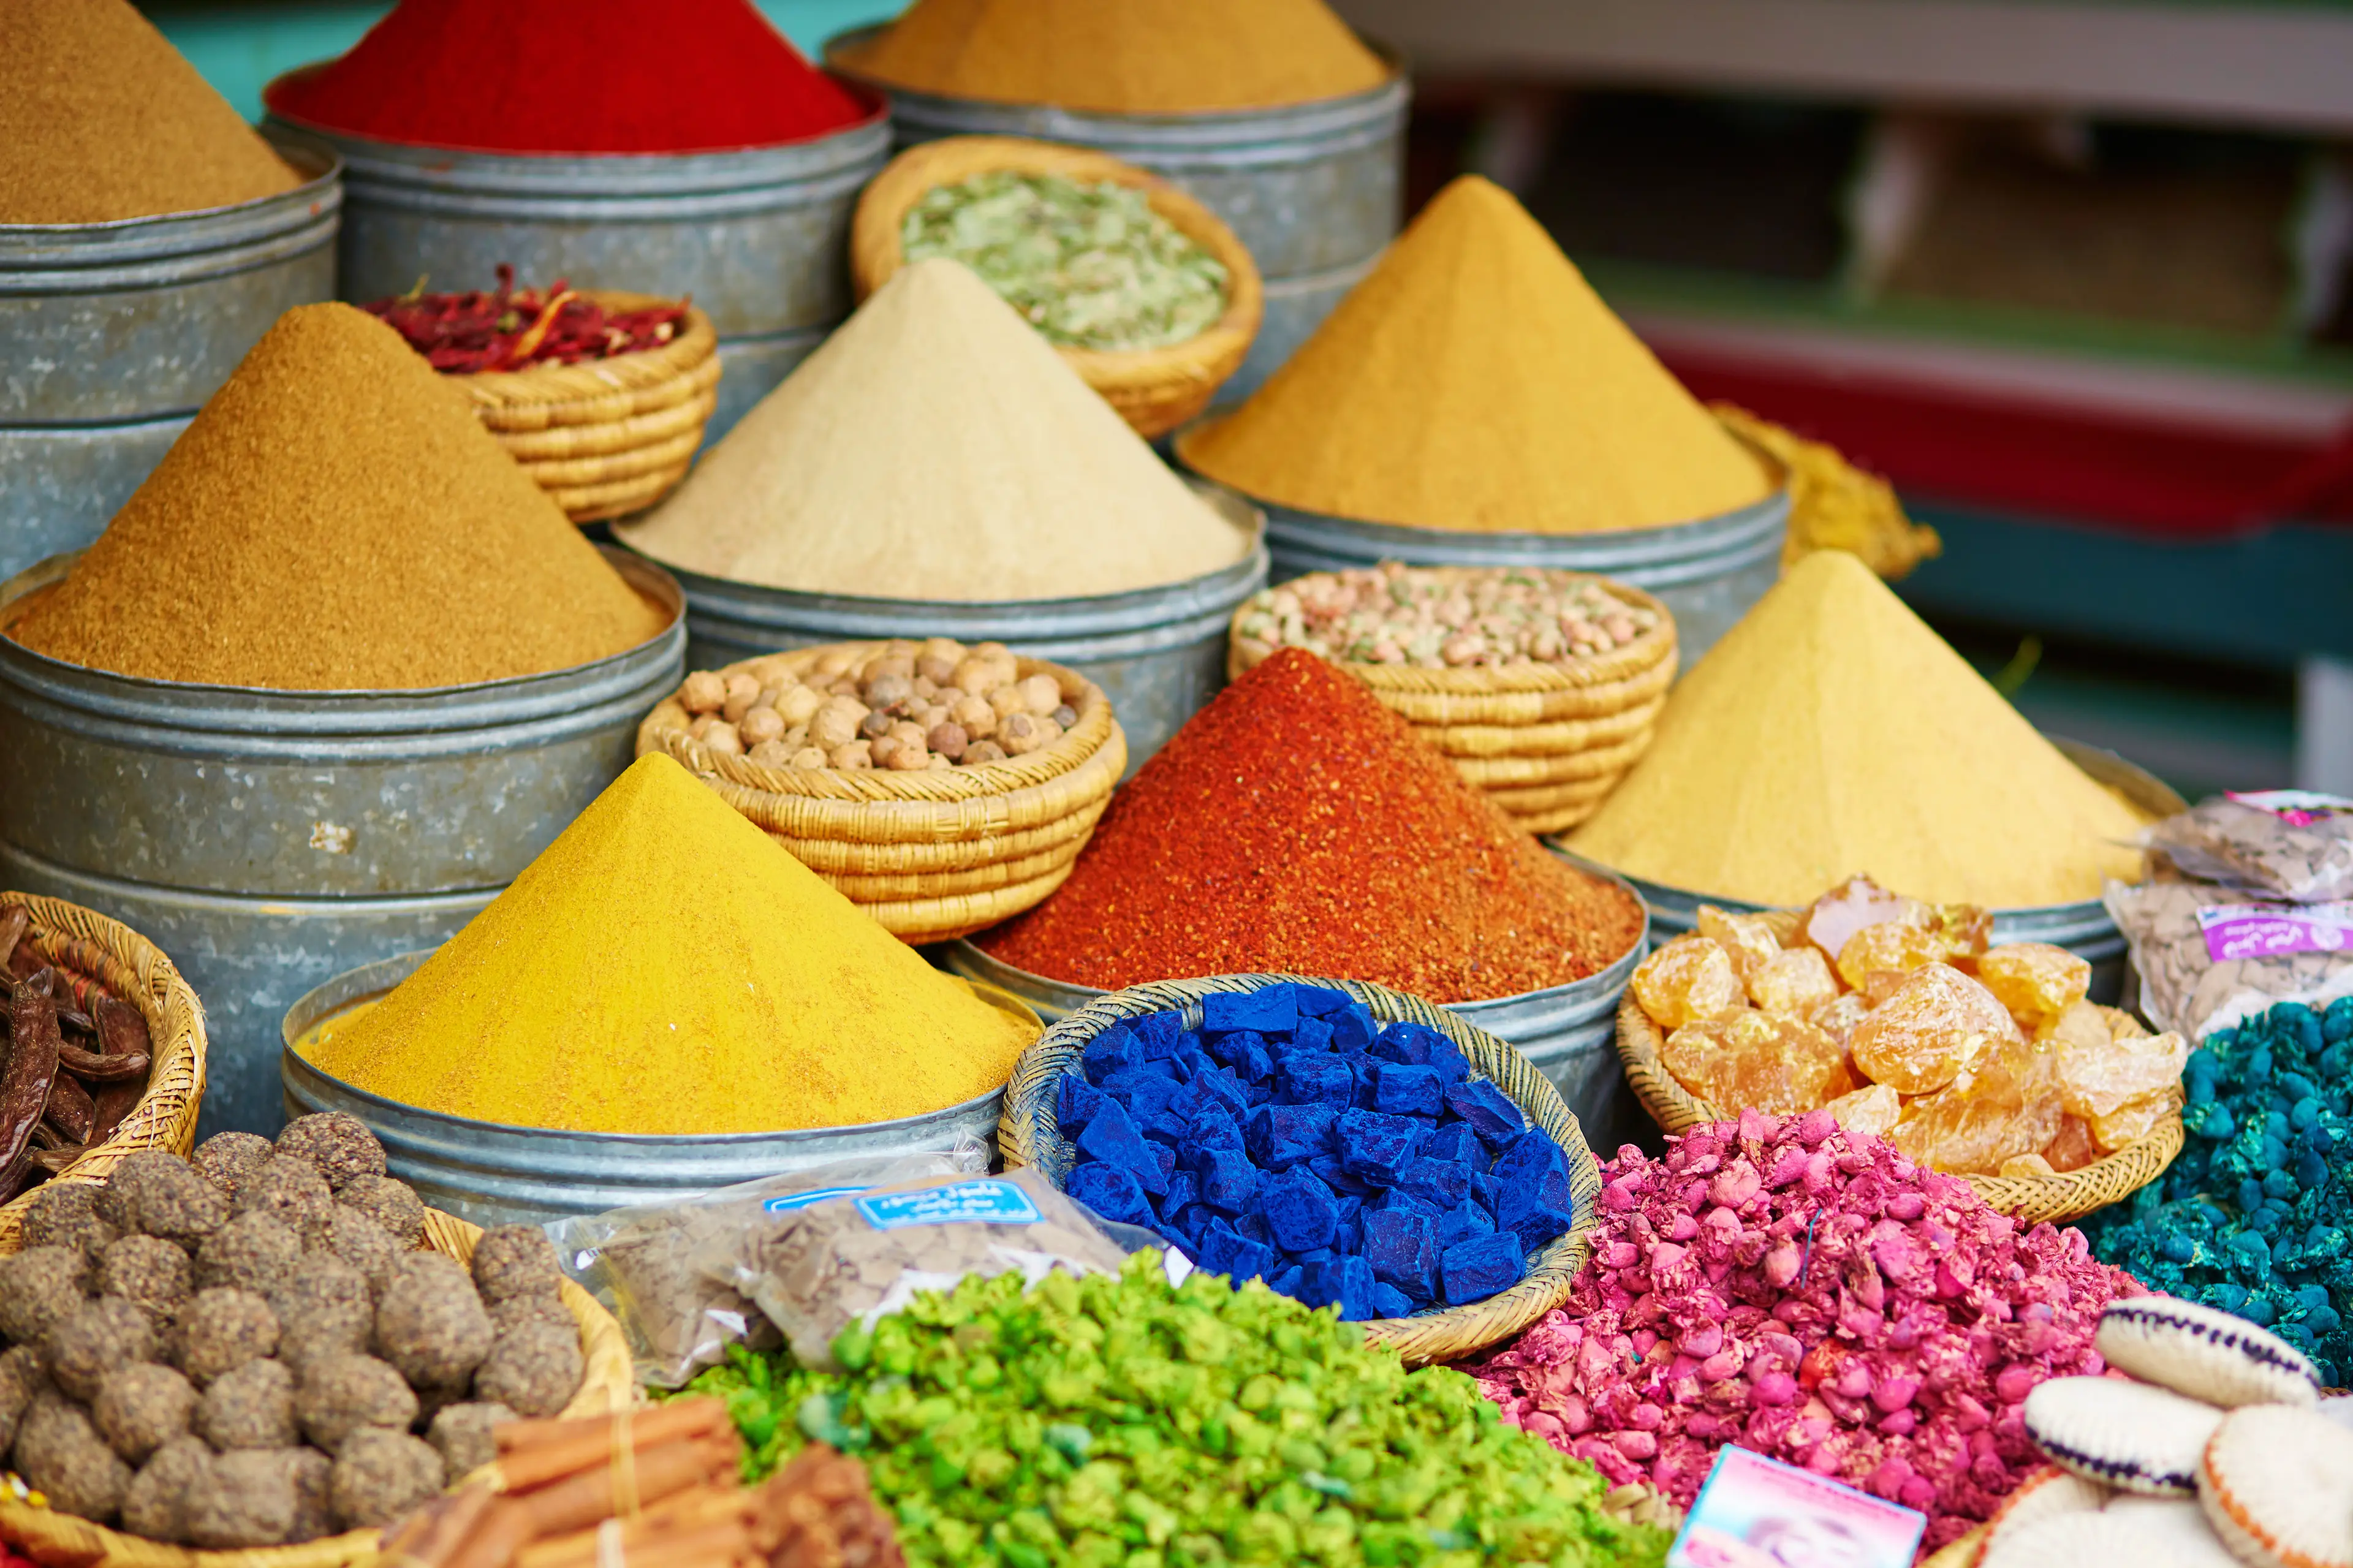 Spices on the market